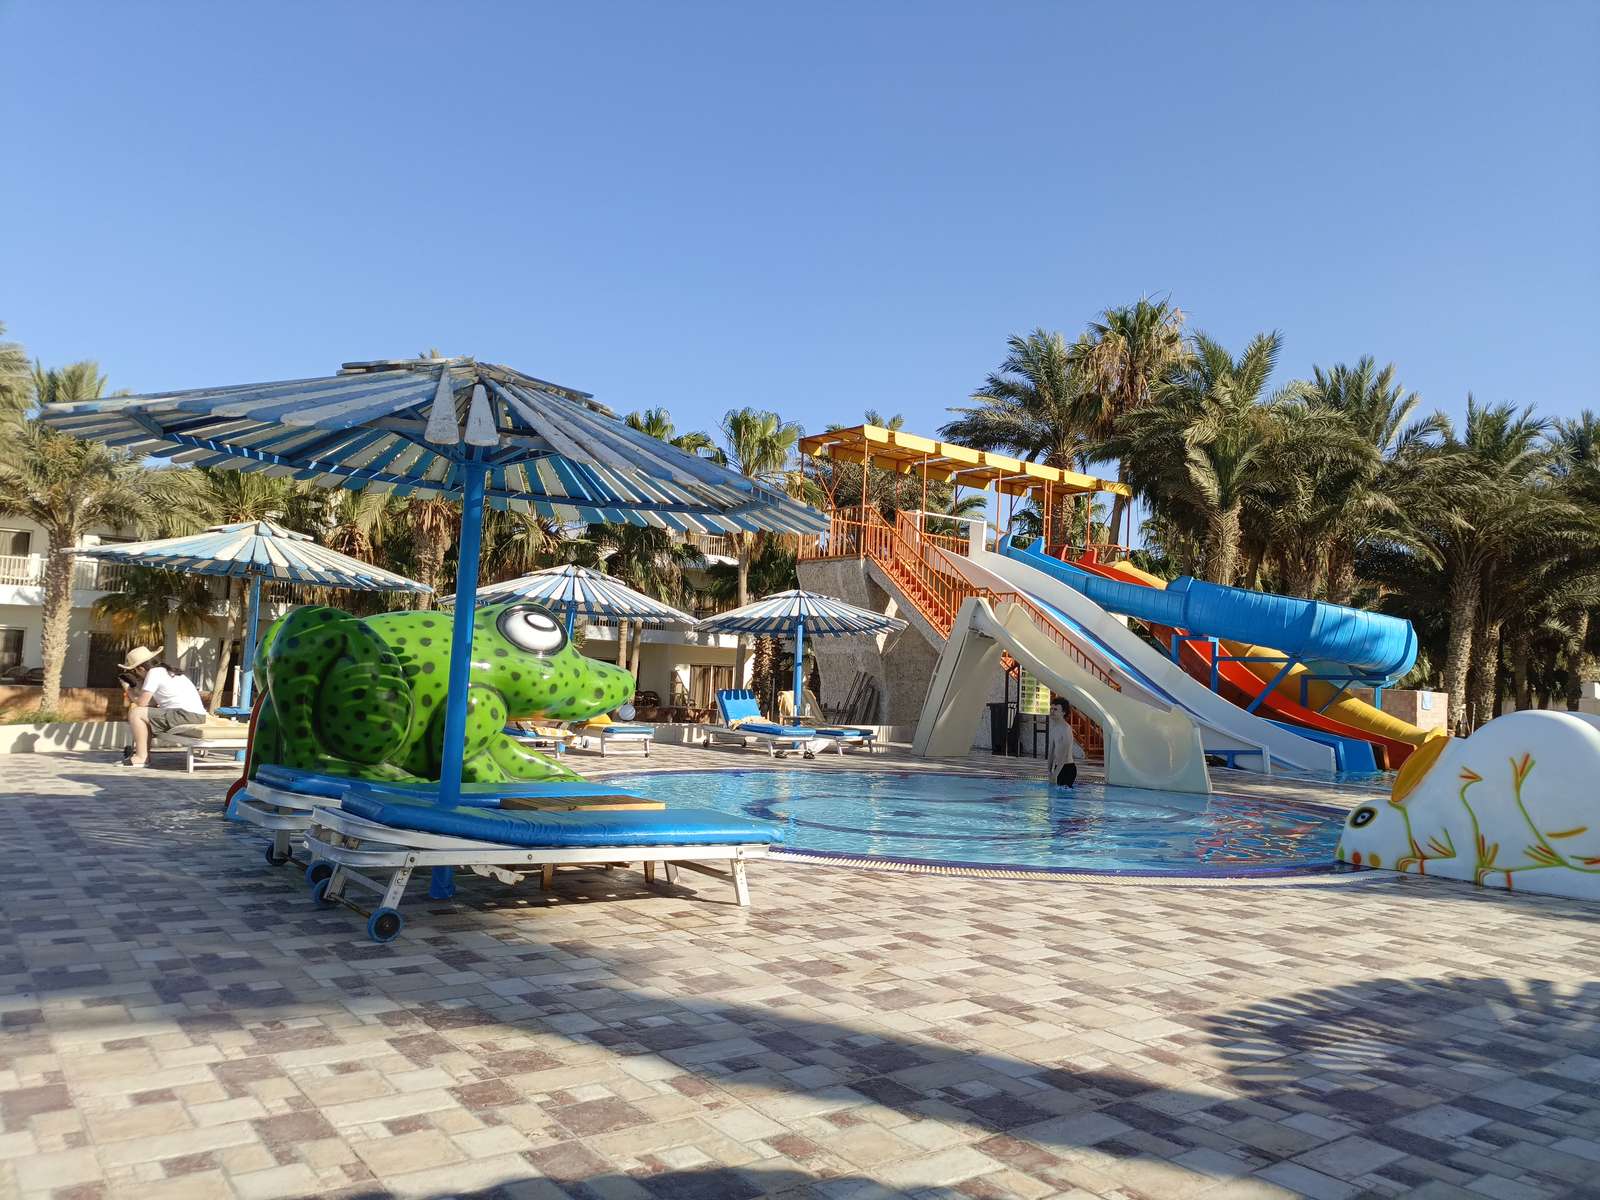 Swimming pool in Hurghada online puzzle